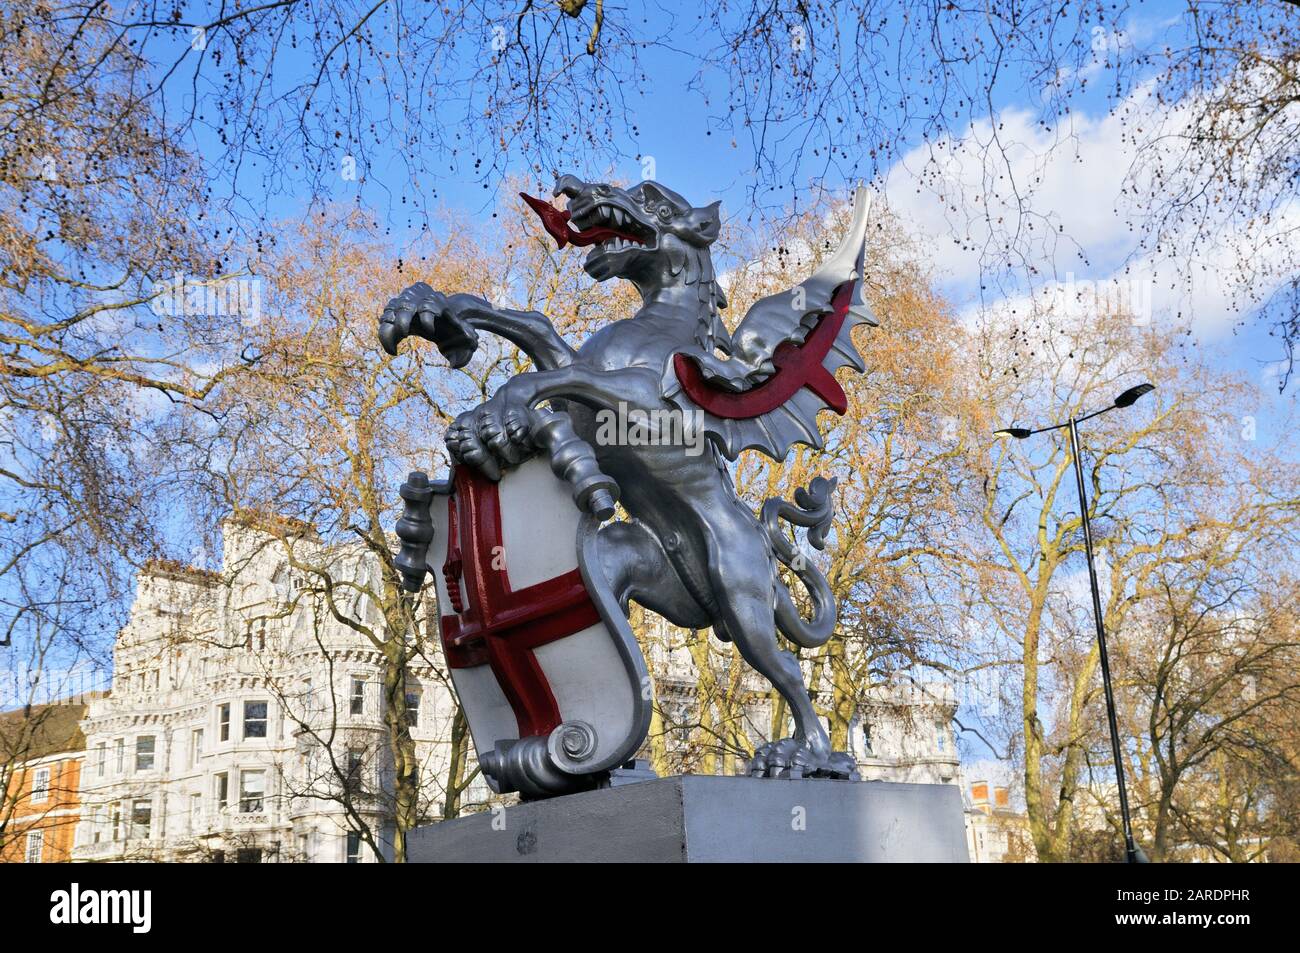 Dragon statue on Victoria Embankment marking the boundary between the City of London and City of Westminster. London, England, UK Stock Photo